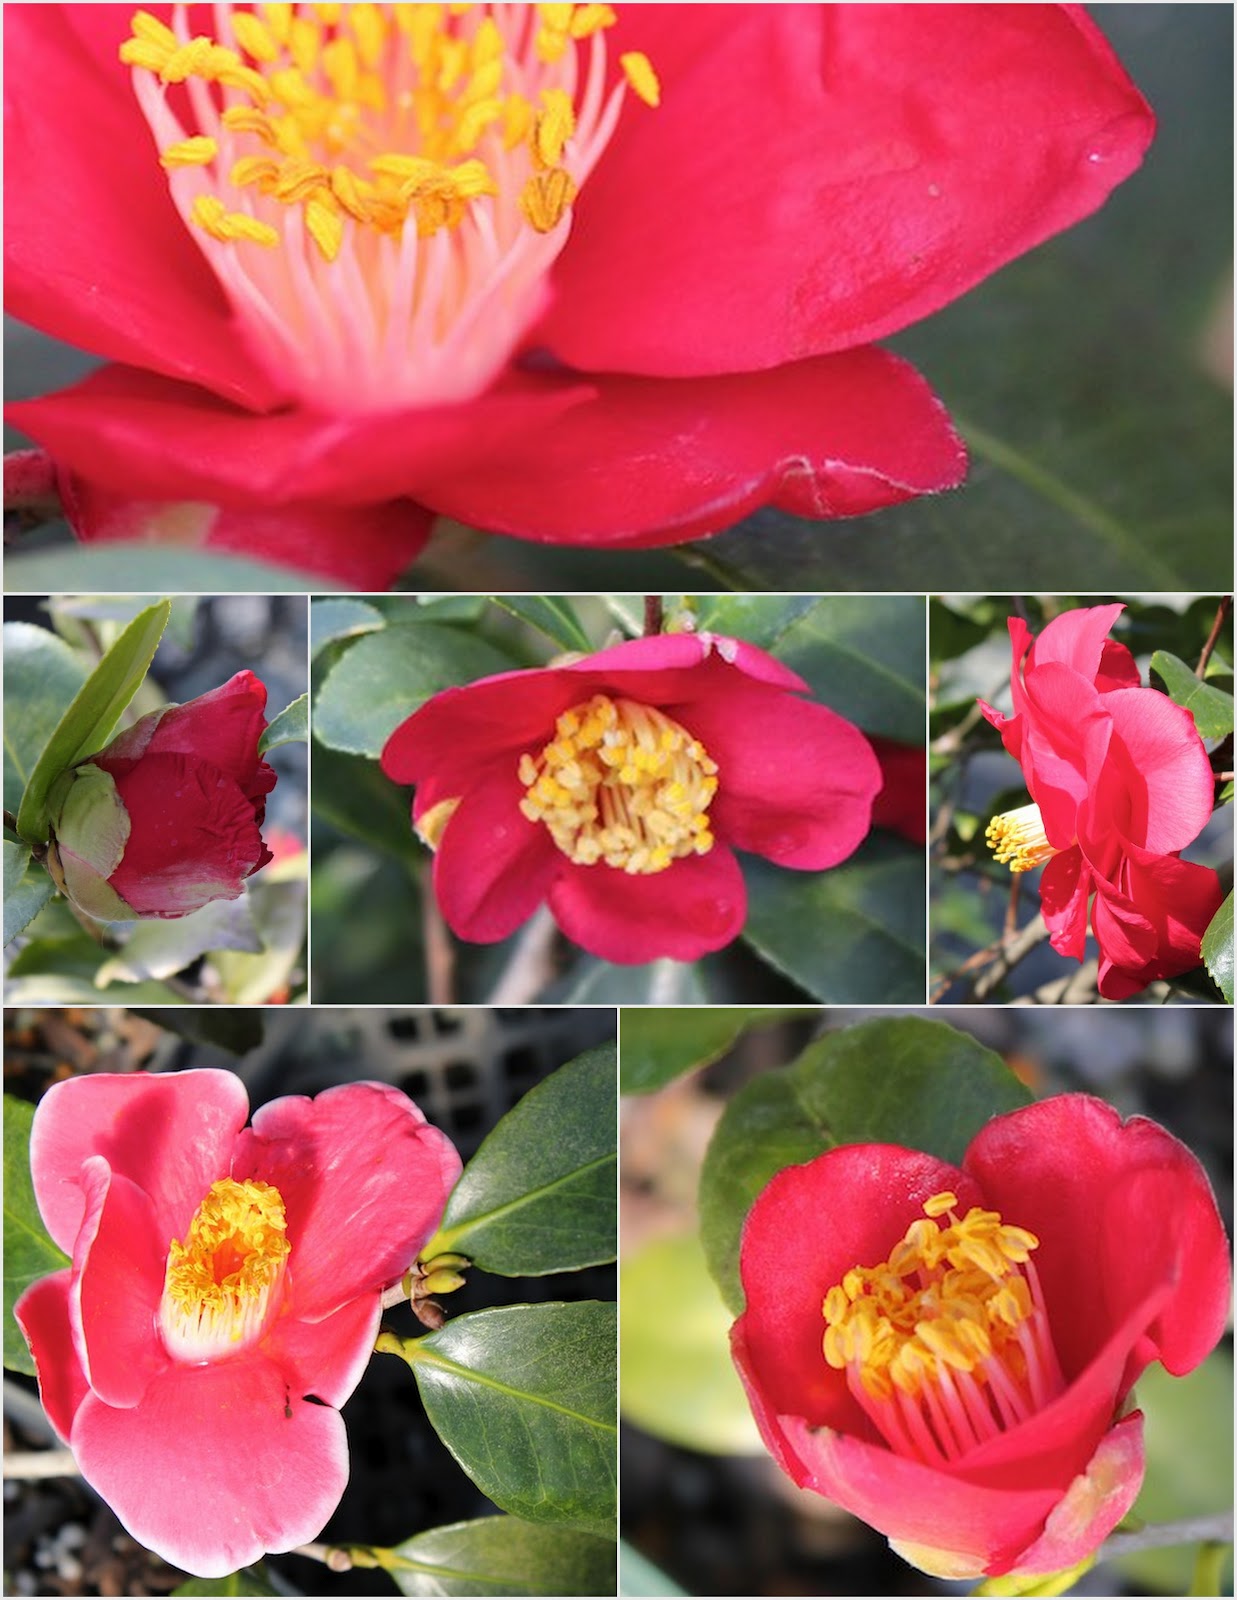 Red House Garden: Search For a Red Camellia - Camellia Forest Nursery